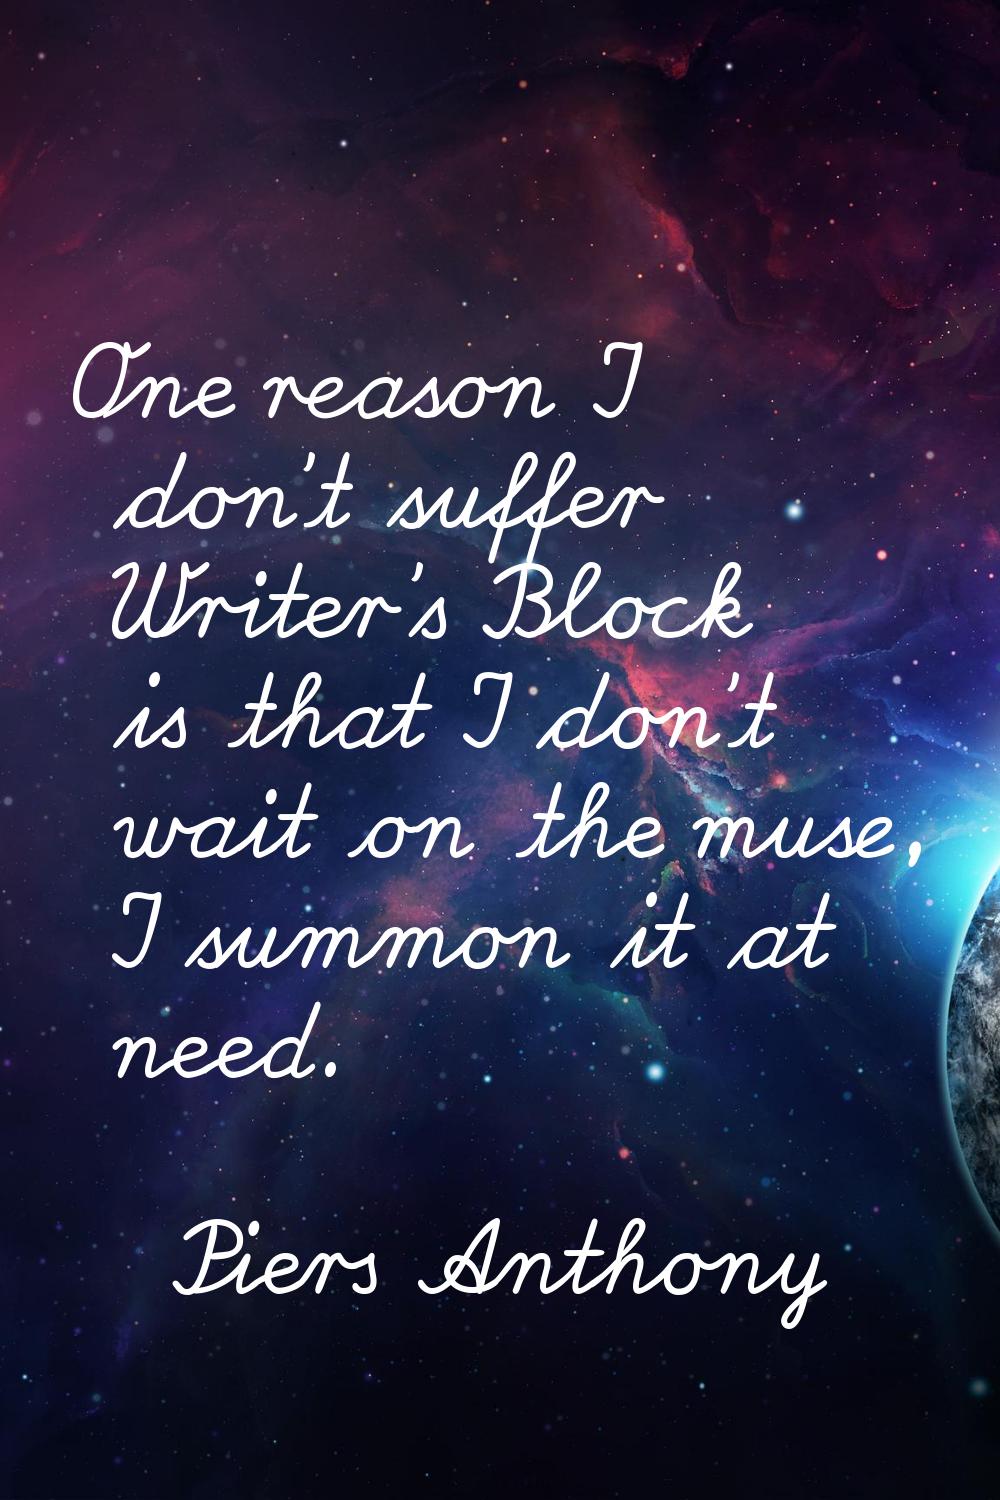 One reason I don't suffer Writer's Block is that I don't wait on the muse, I summon it at need.